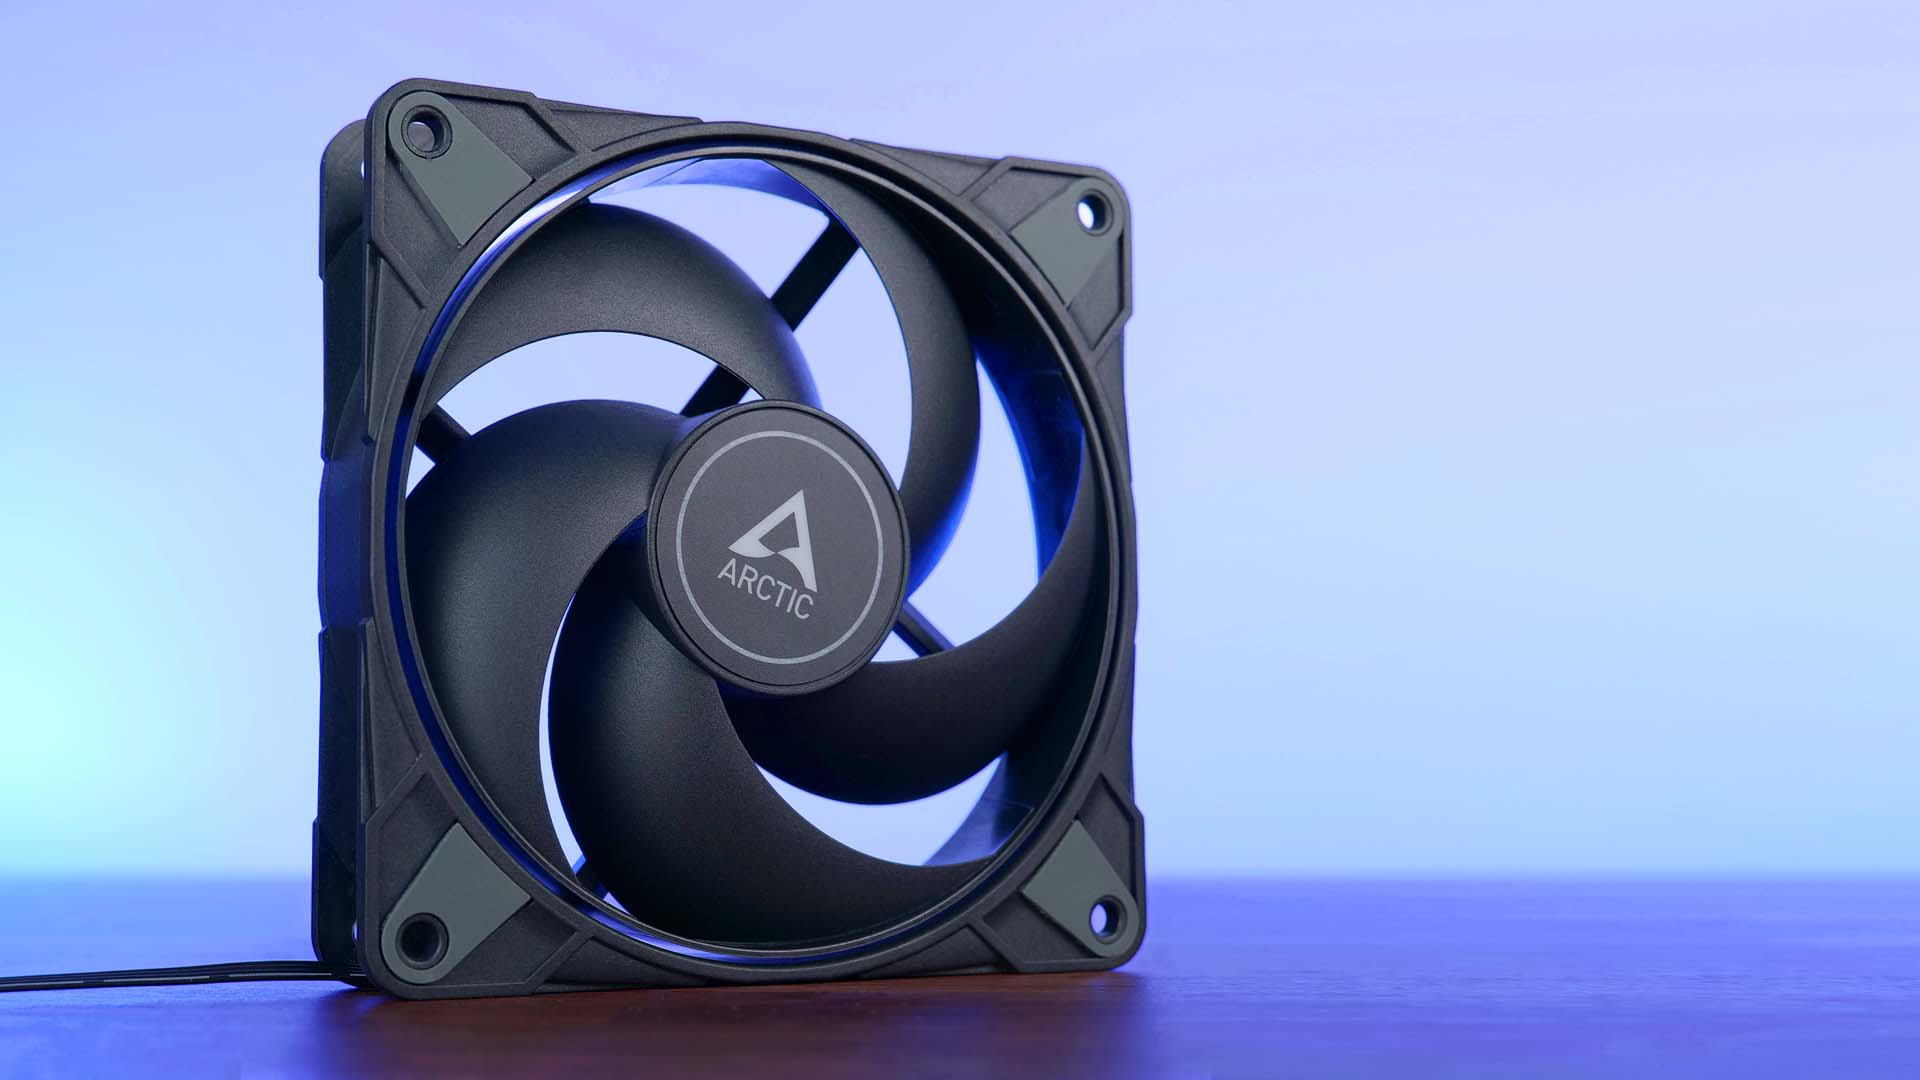 ARCTIC Introduces the New ARCTIC P12 Max High-Performance 120mm Fan